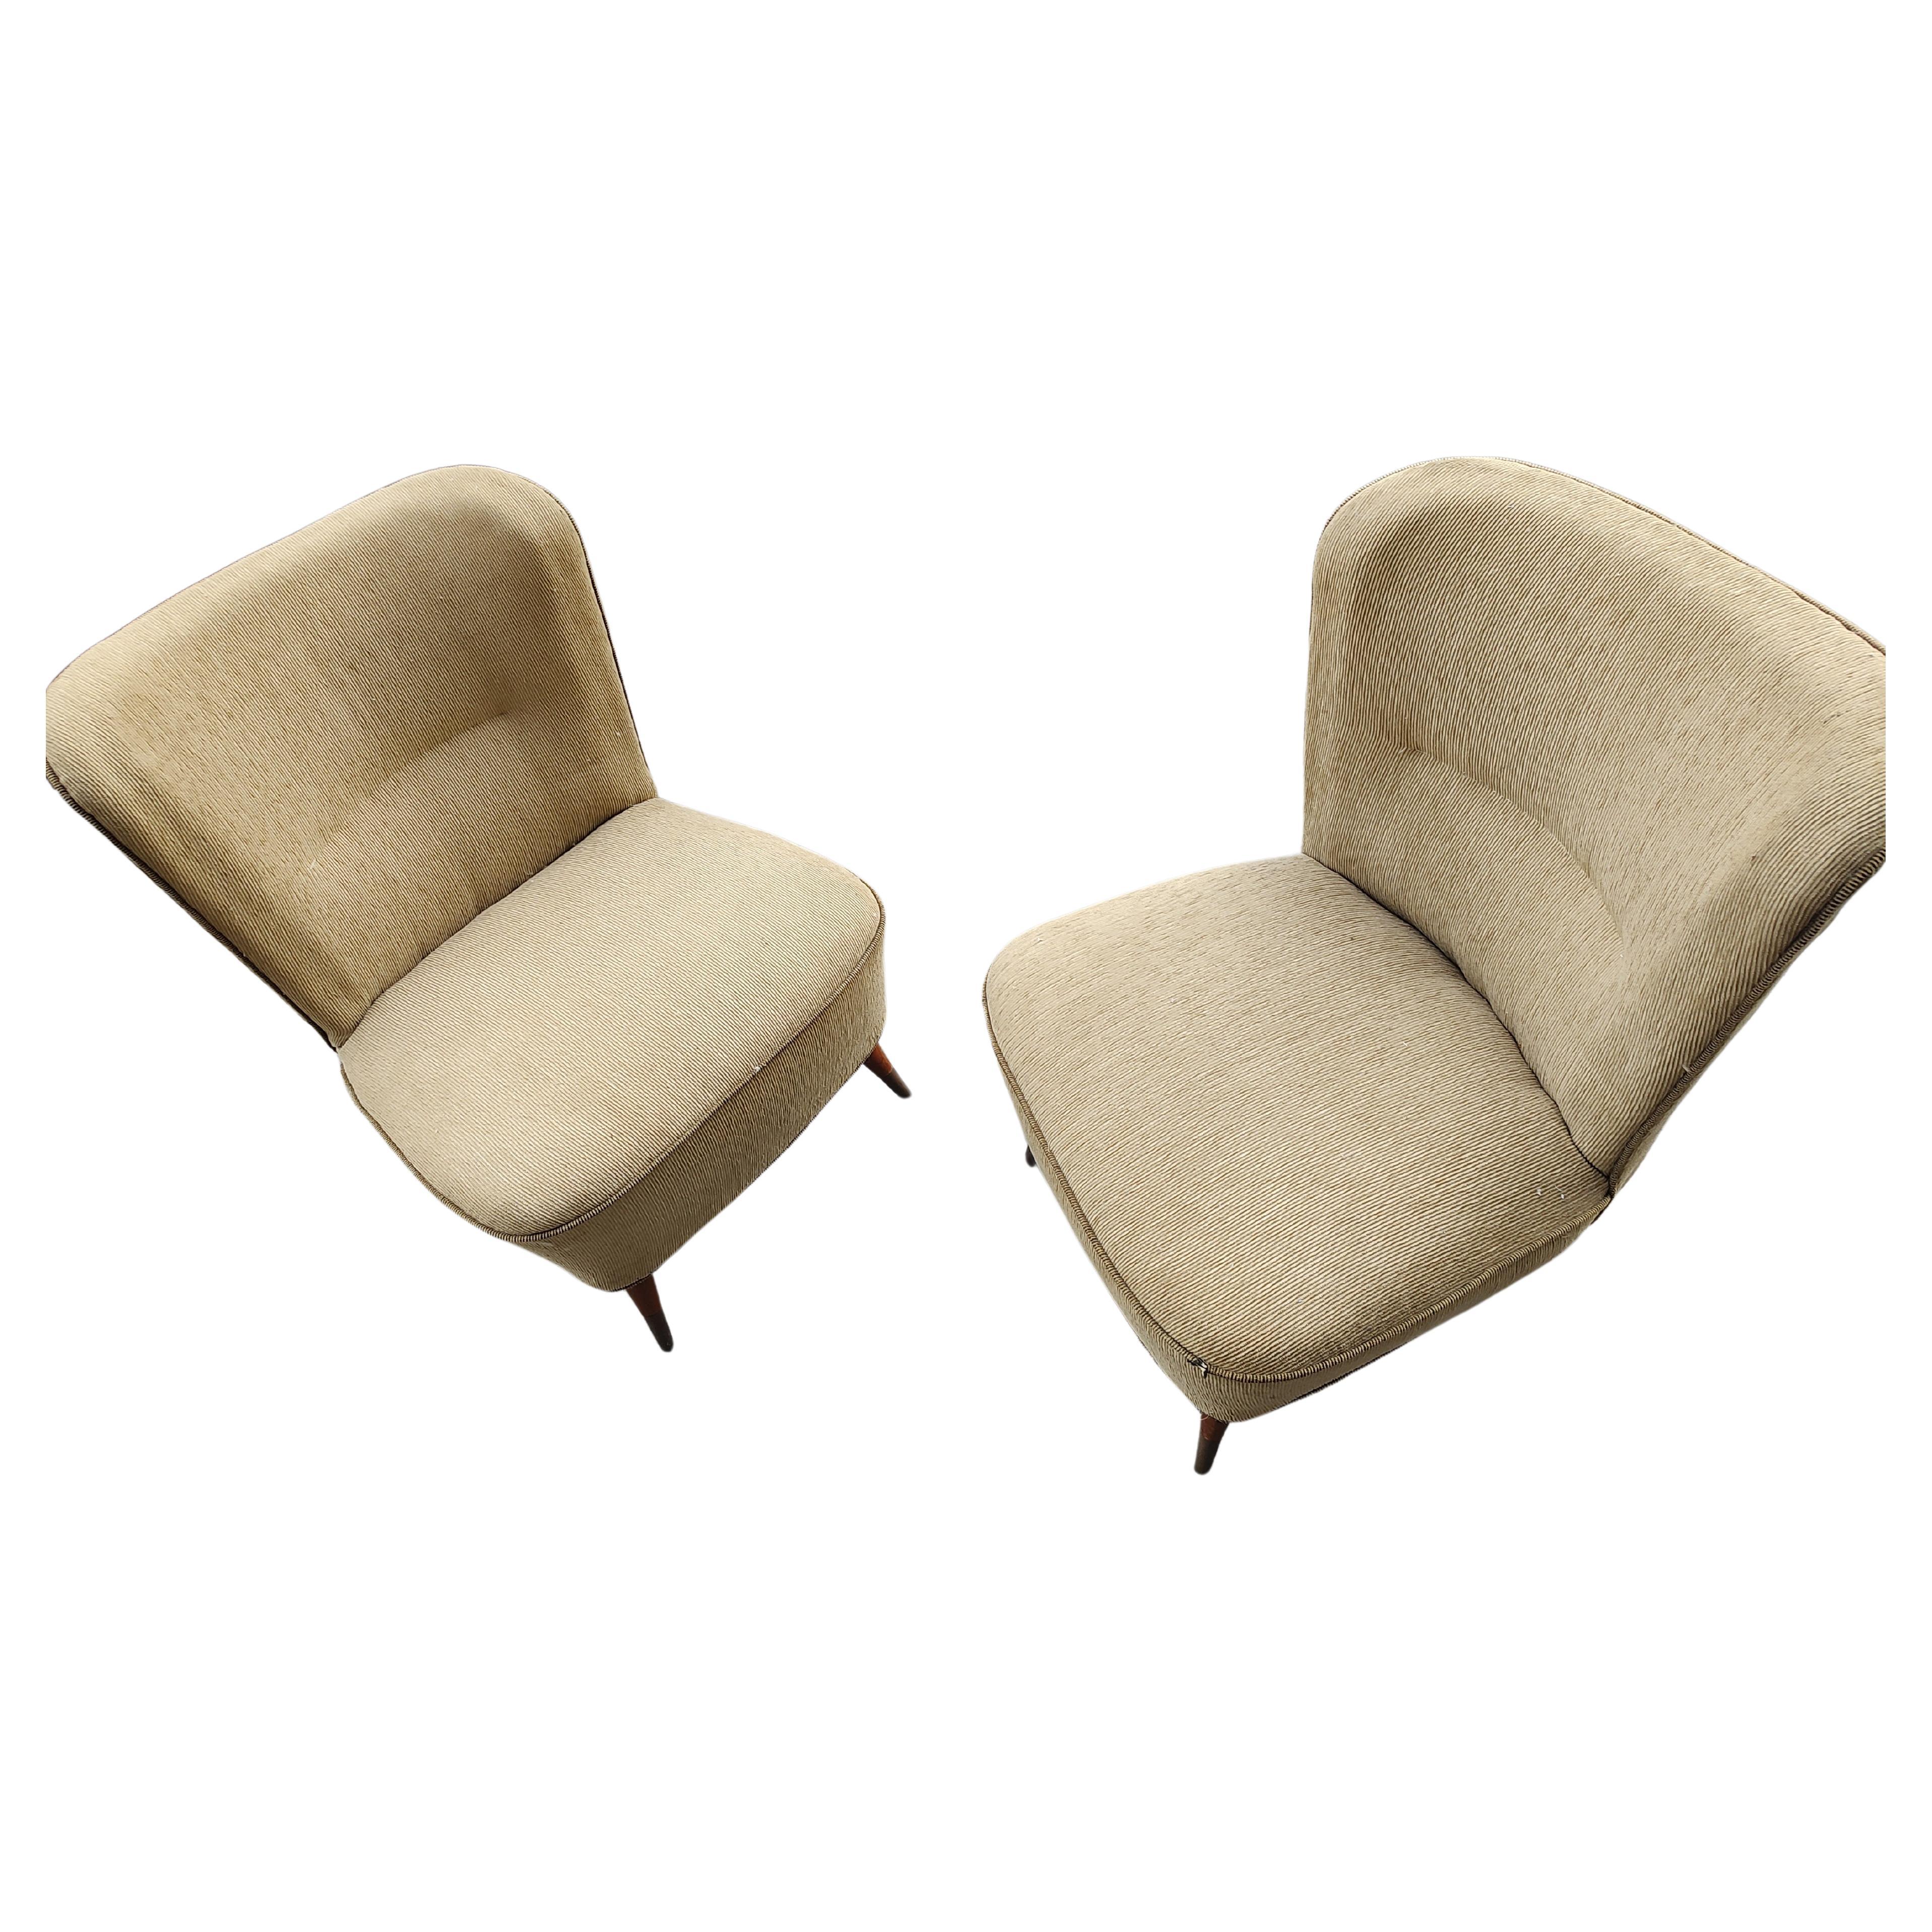 Hand-Crafted Pair of Mid Century Modern Sculptural Italian Styled Slipper Chairs C1950 For Sale